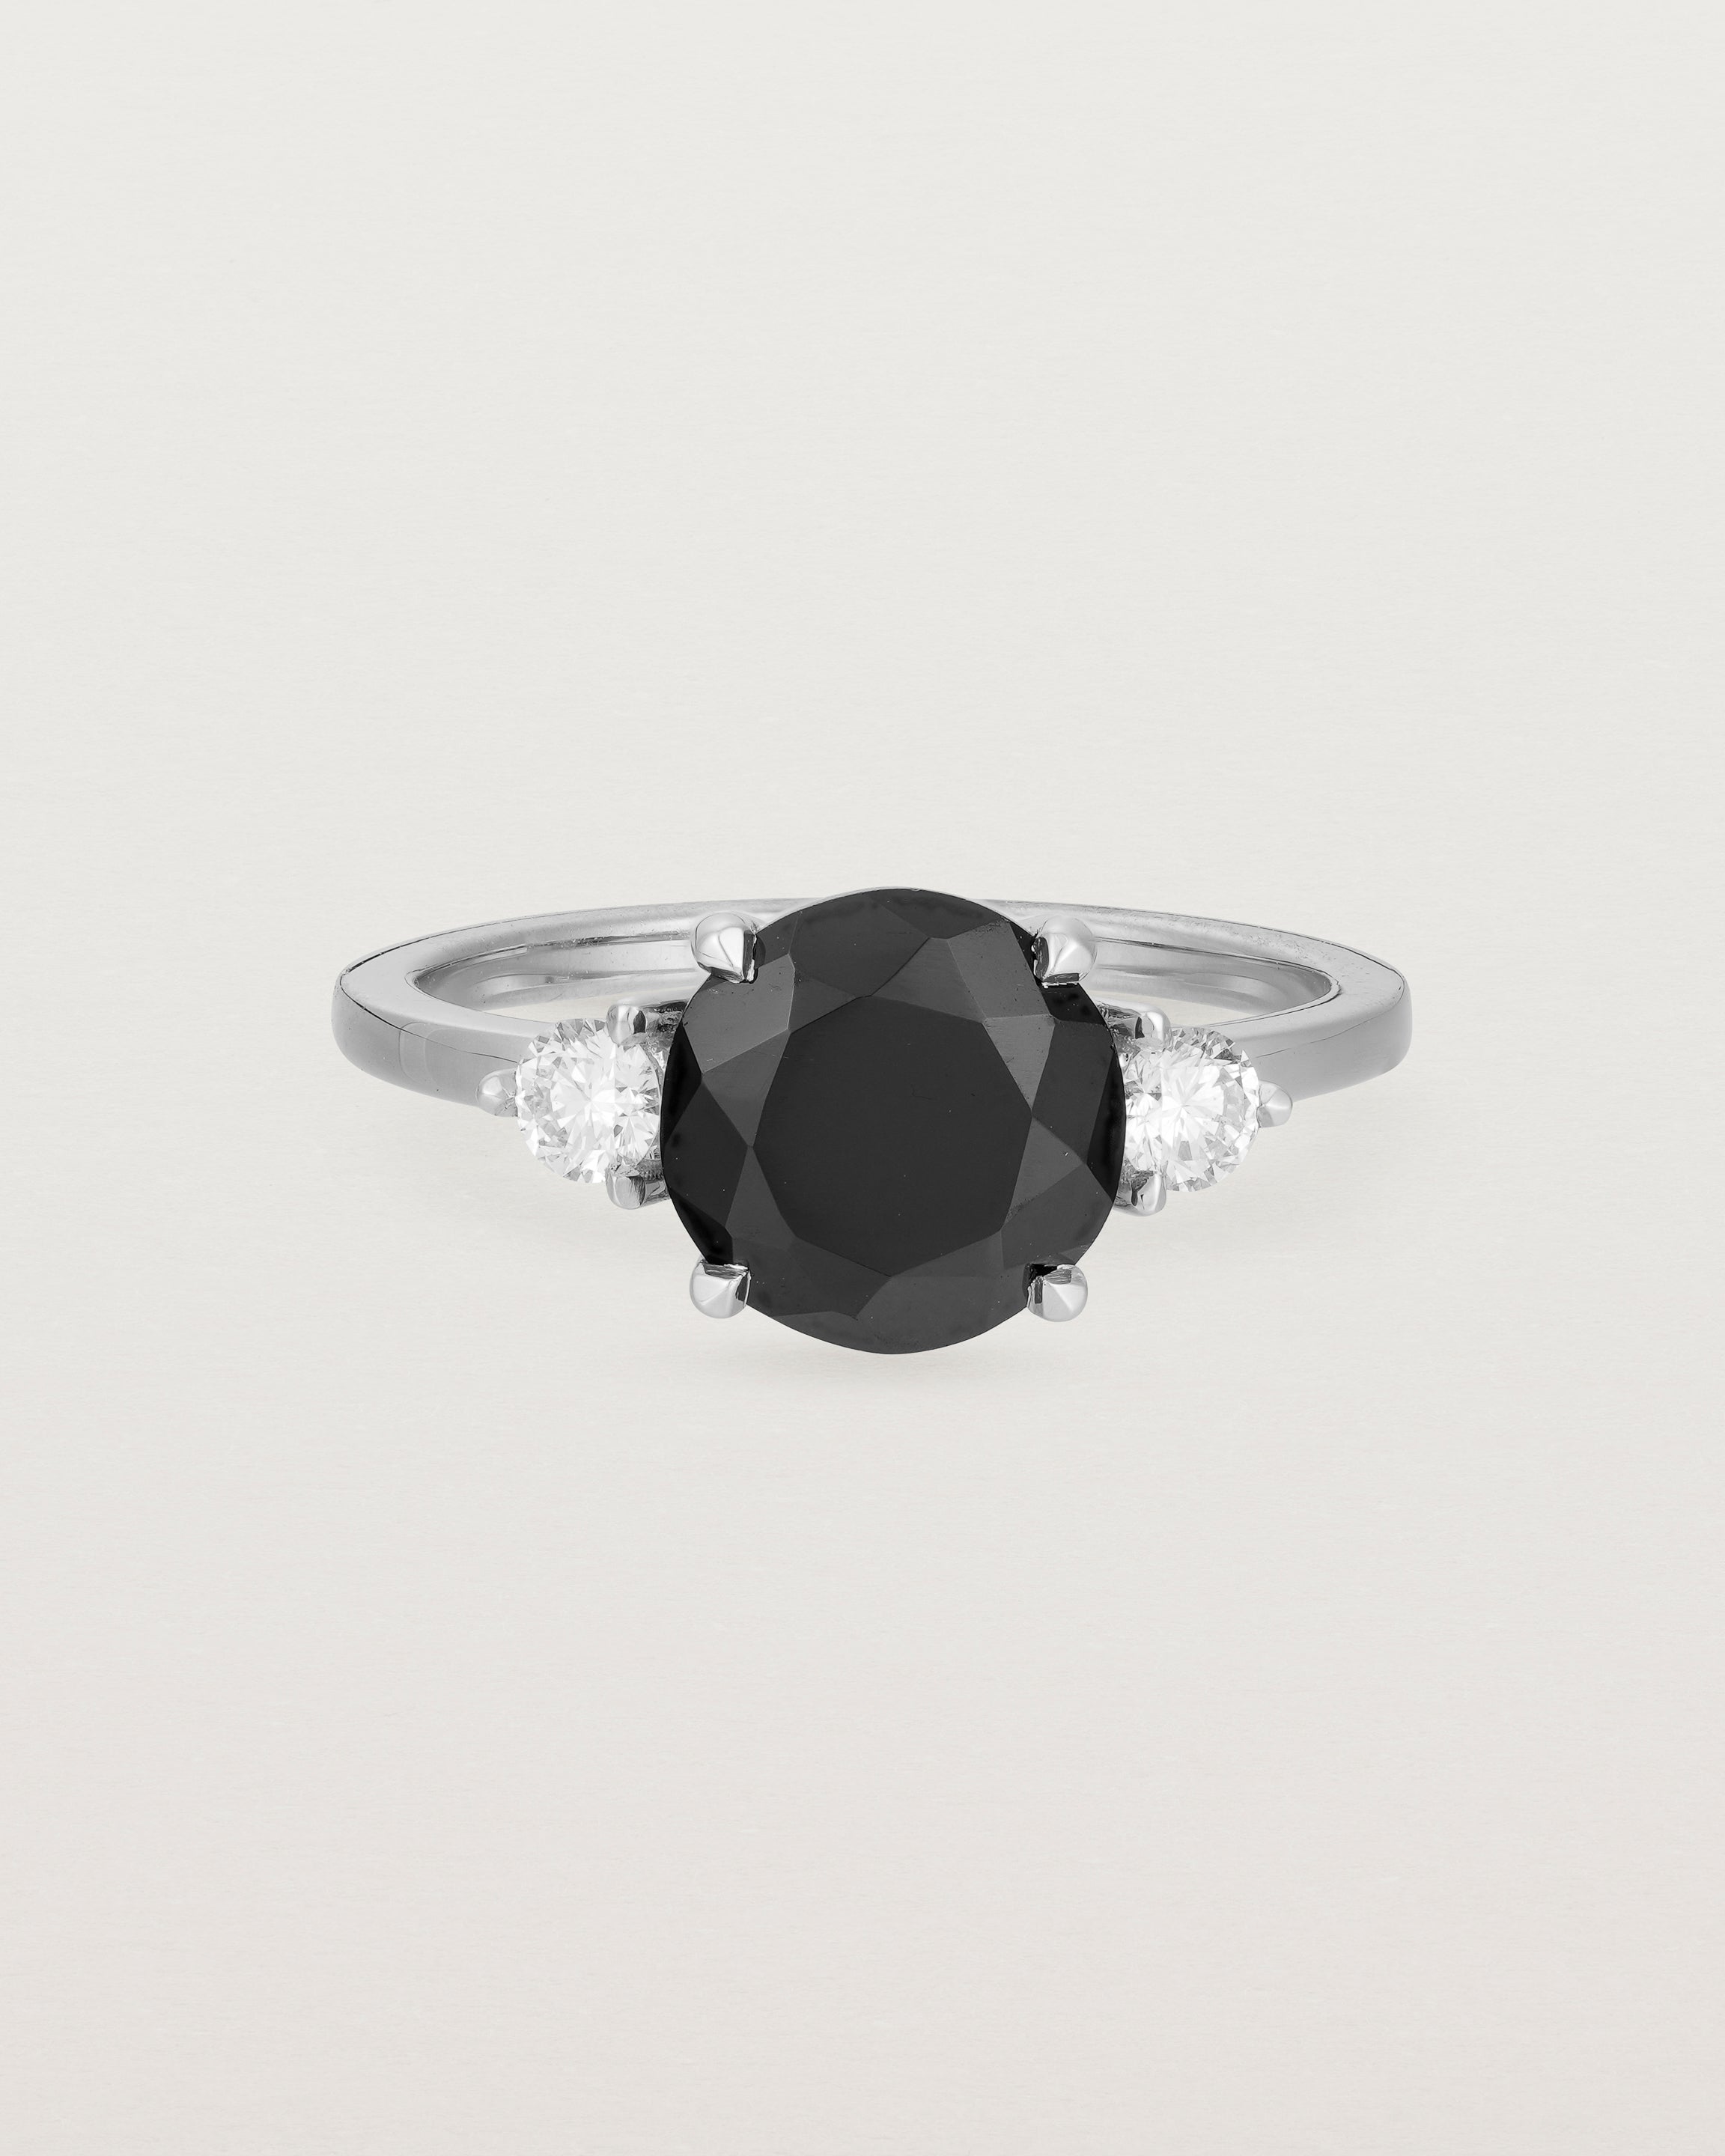 Front view of the Una Round Trio Ring | Black Spinel & Diamonds | White Gold.